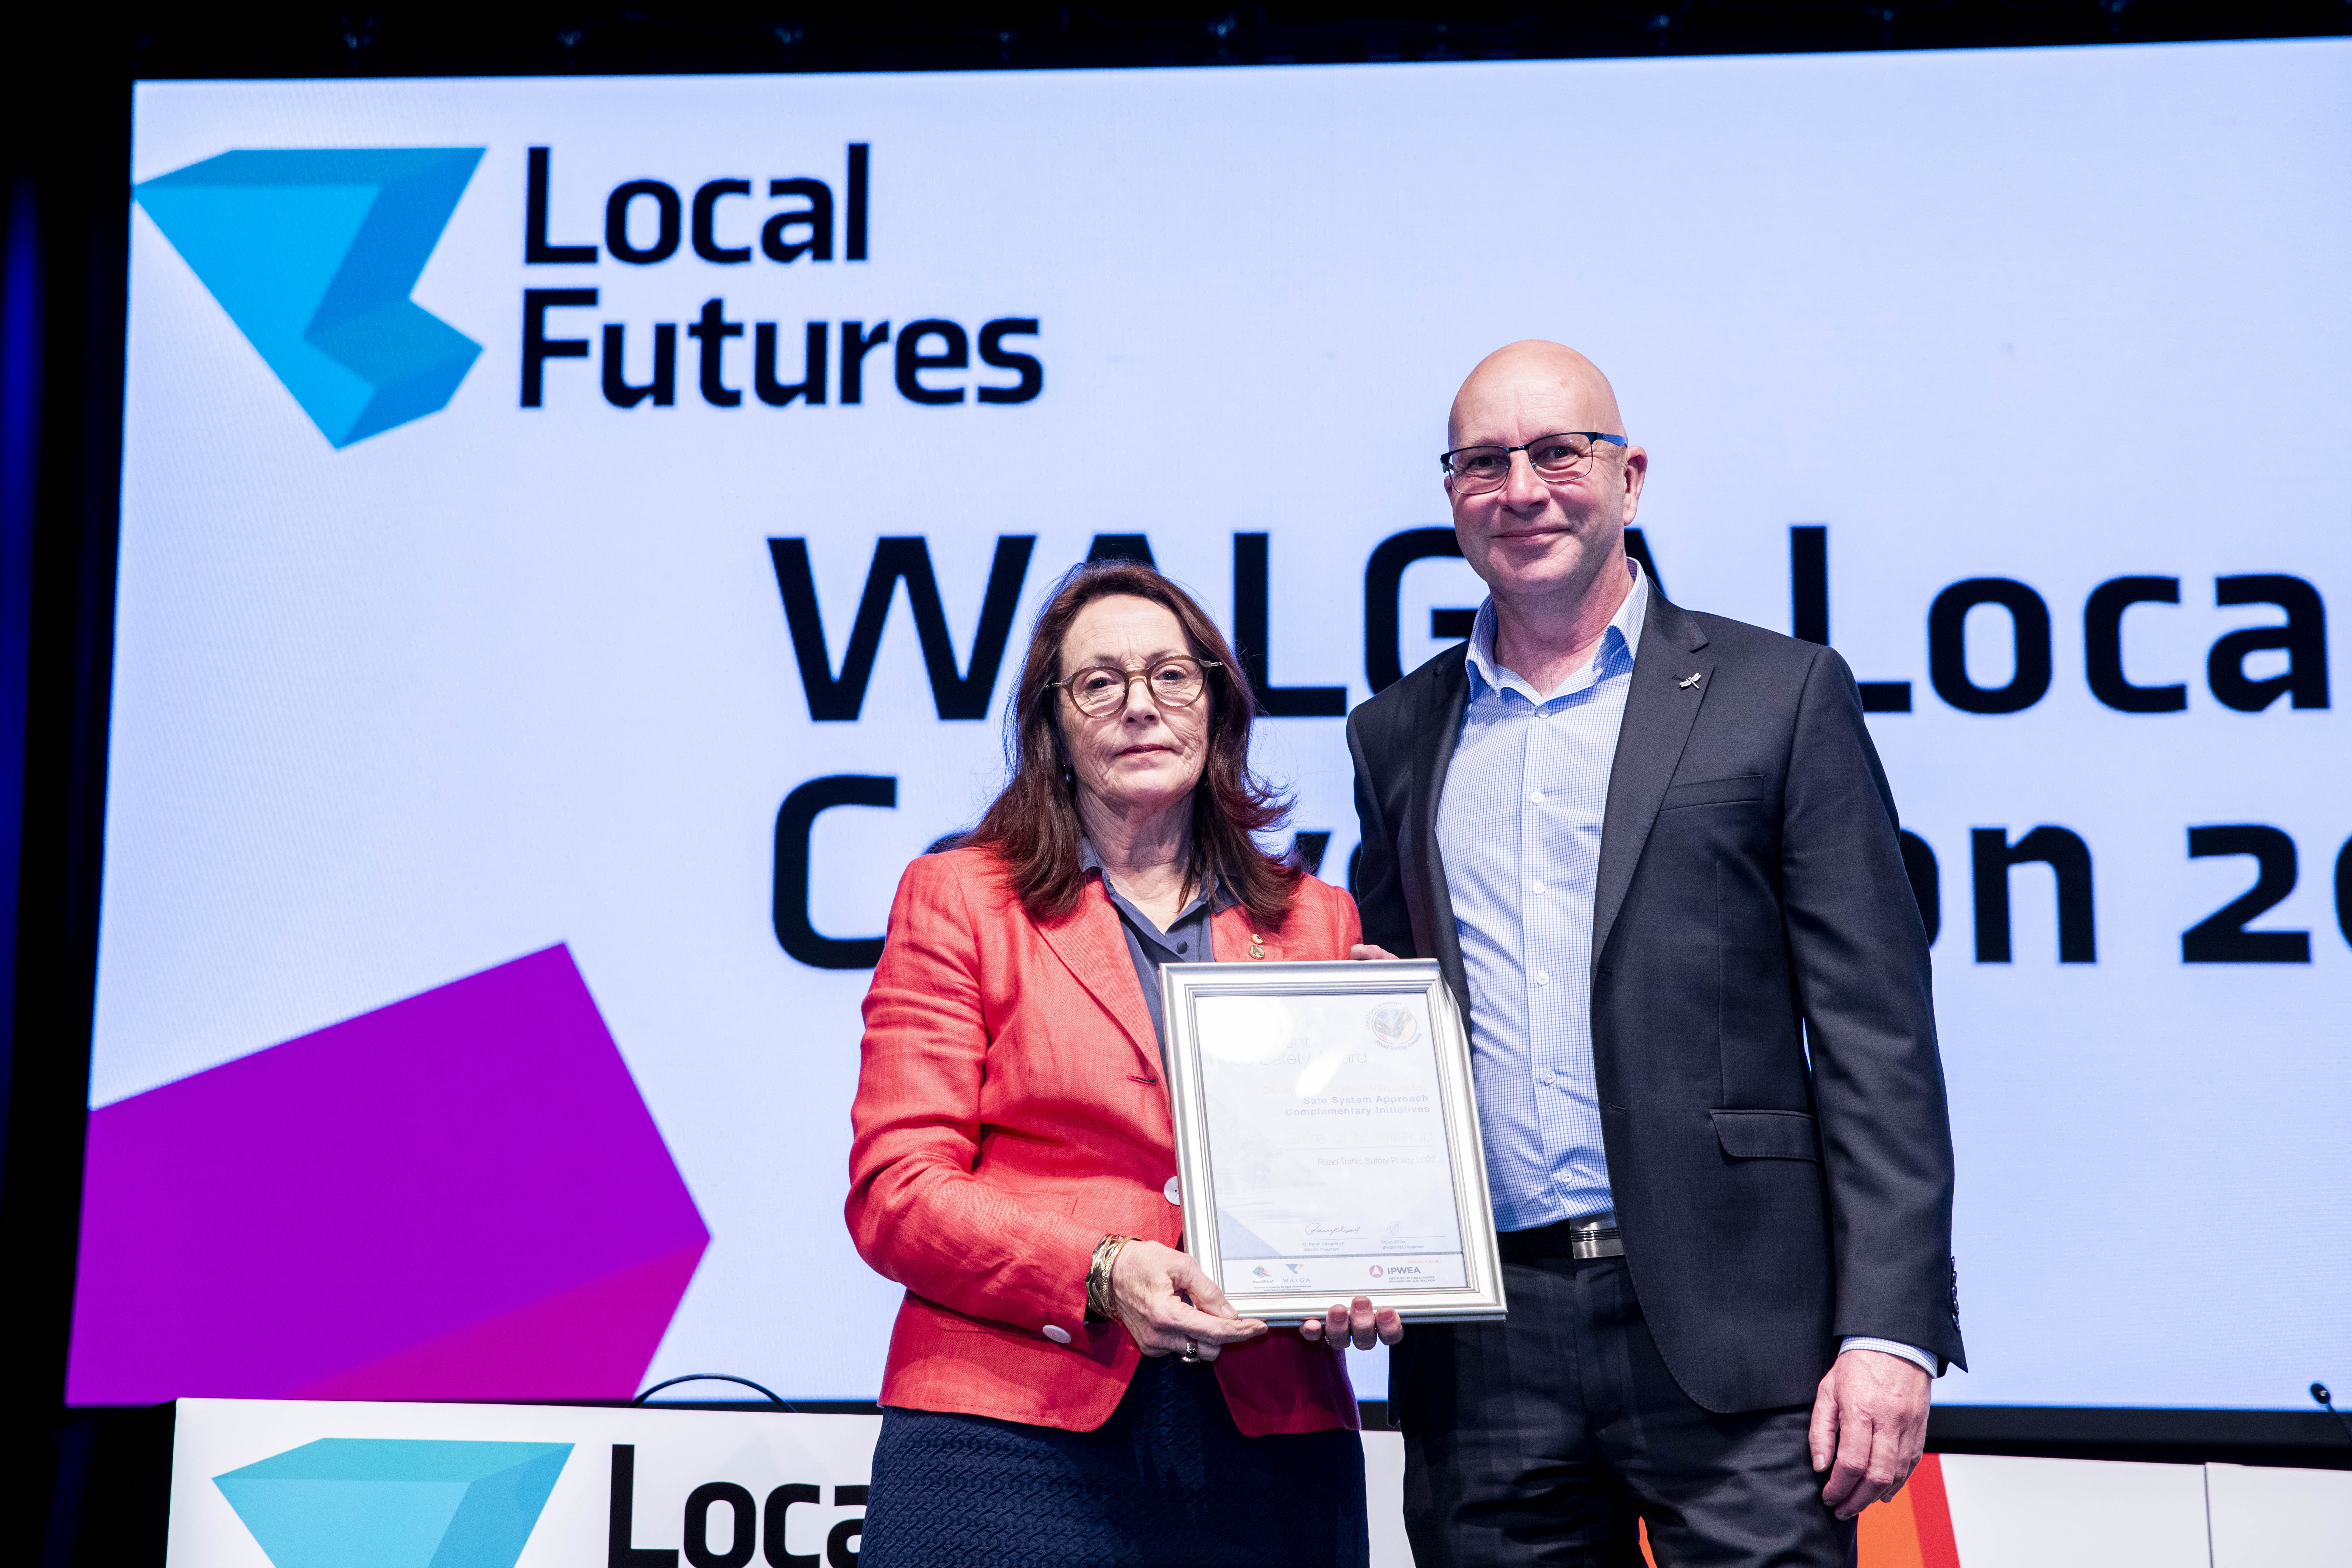 WALGA President Karen Chappel and Director or Works Michael Leers with the award.